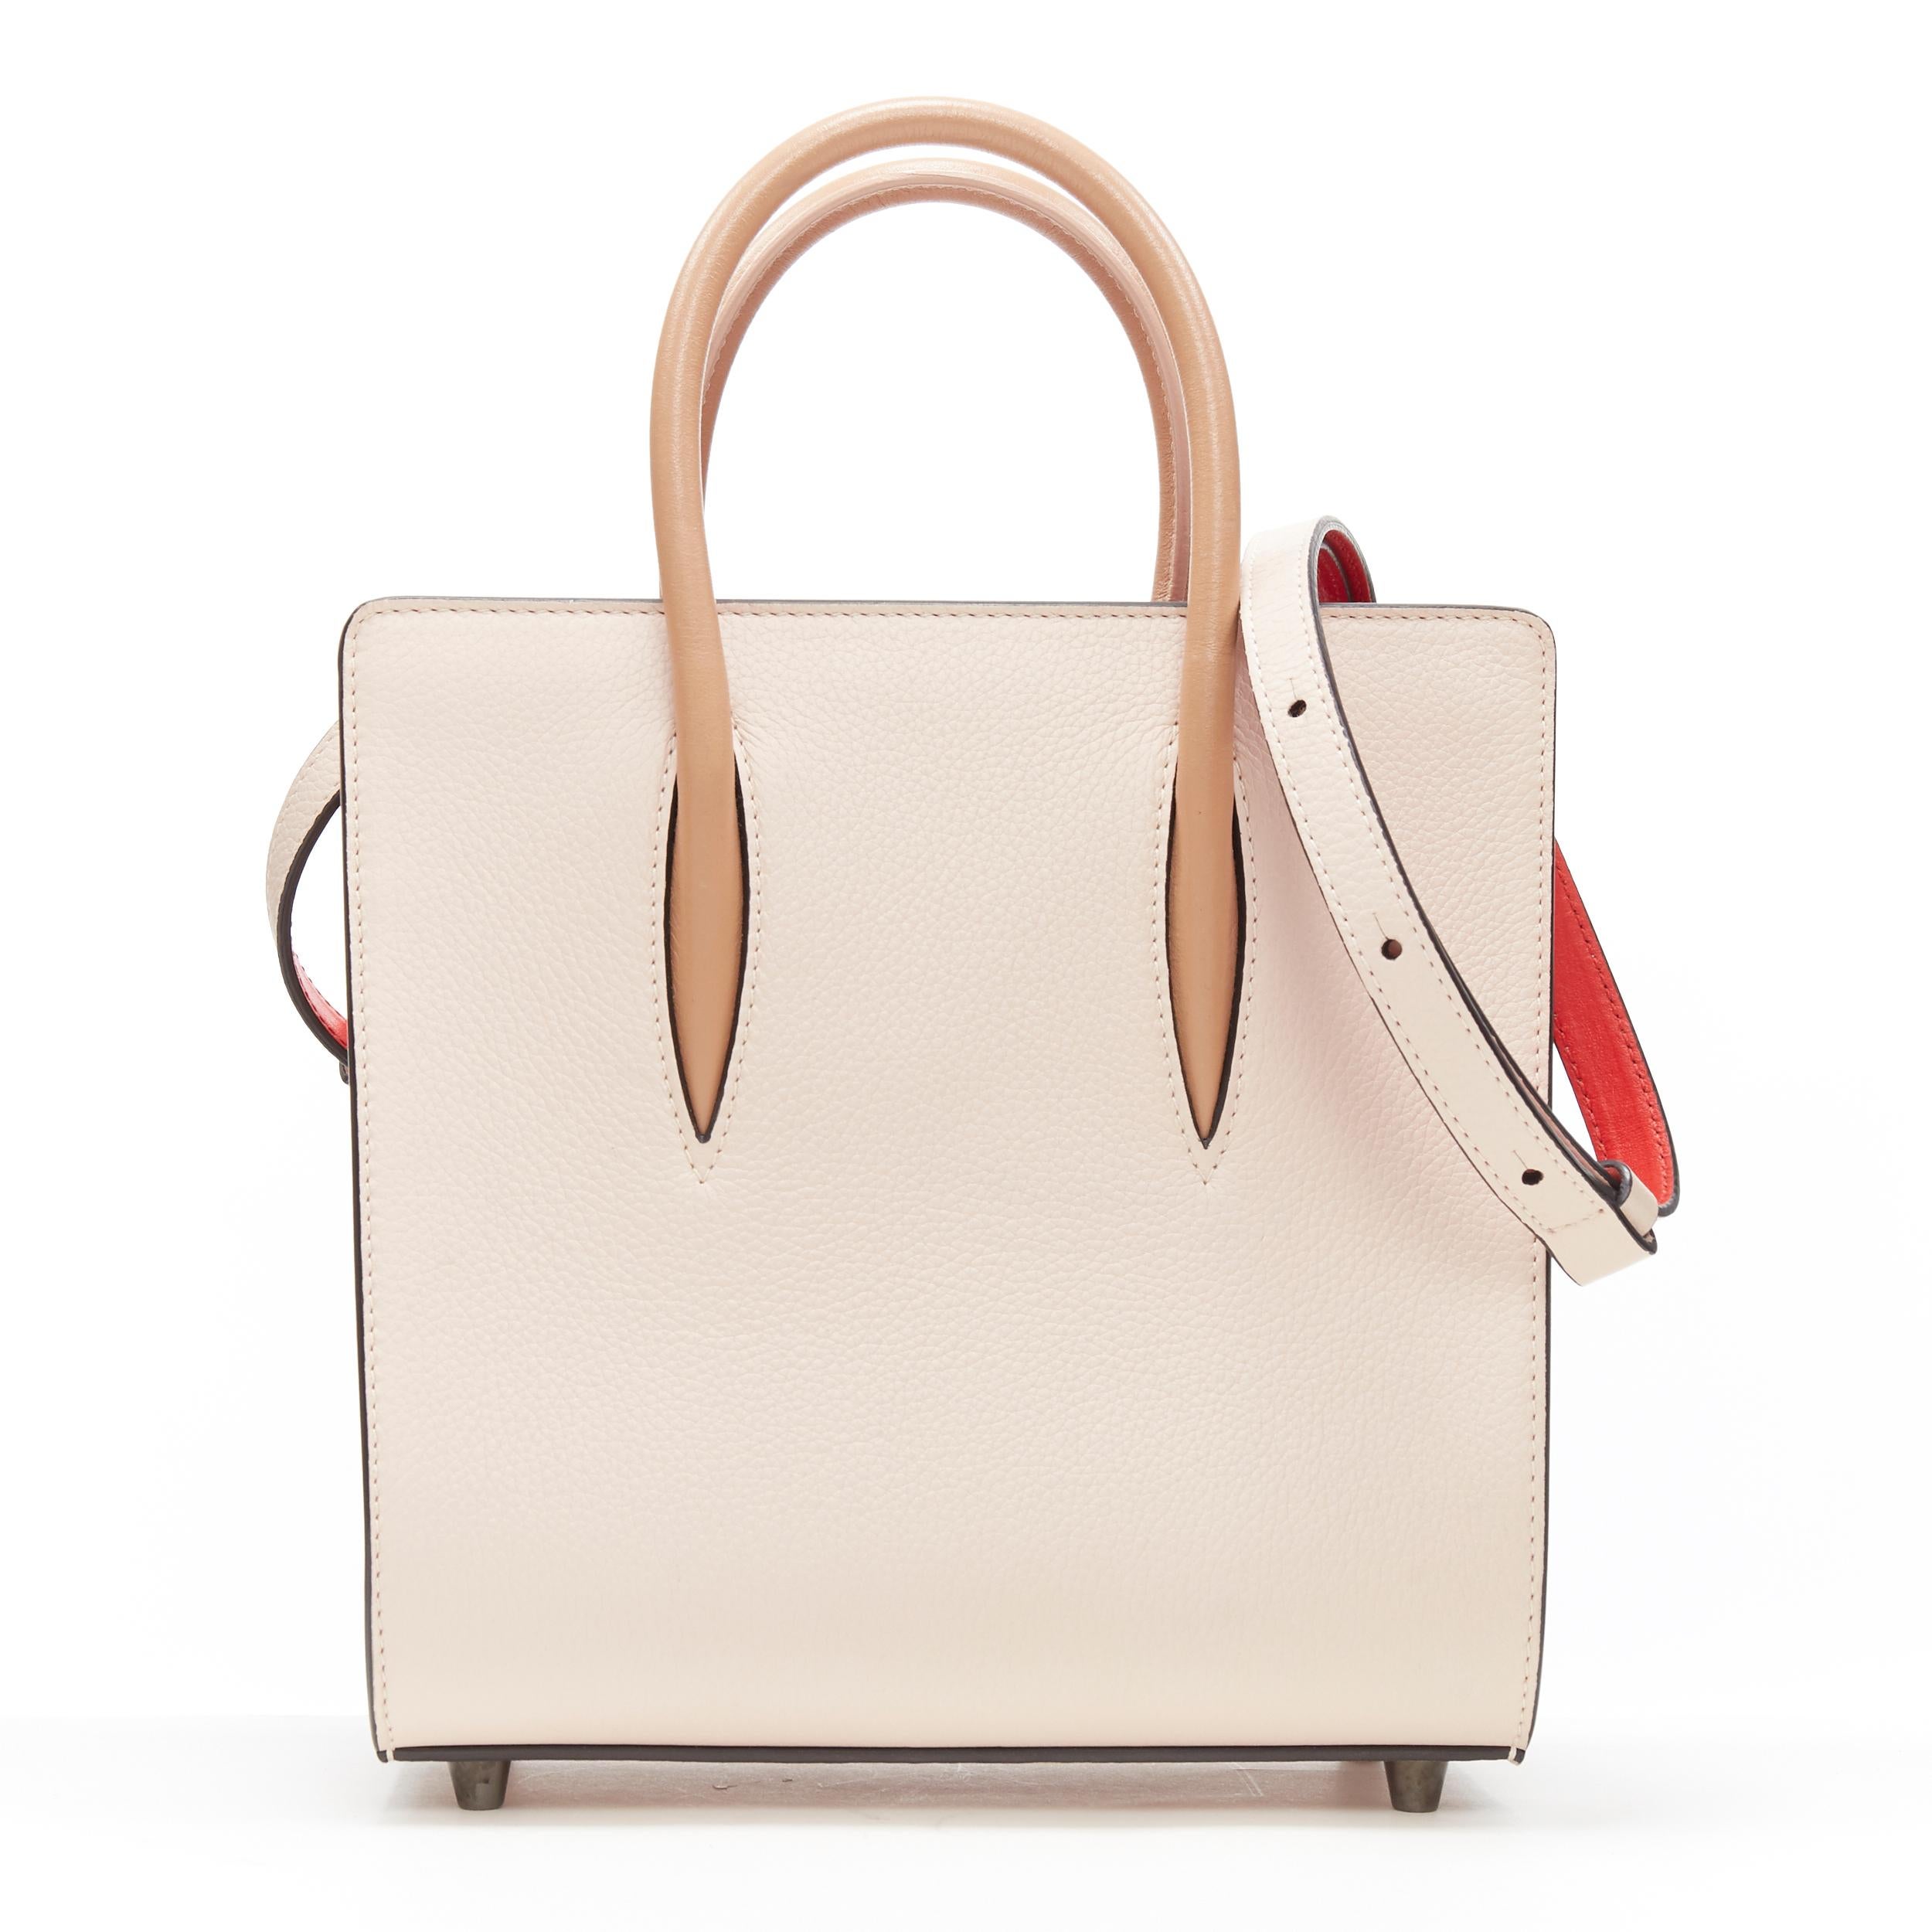 CHRISTIAN LOUBOUTIN Paloma Small pale pink studded nude patent shoulder tote bag
Brand: Christian Louboutin
Designer: Christian Louboutin
Model Name / Style: Paloma
Material: Leather
Color: Pink
Pattern: Solid
Extra Detail:  Feature Adjustable